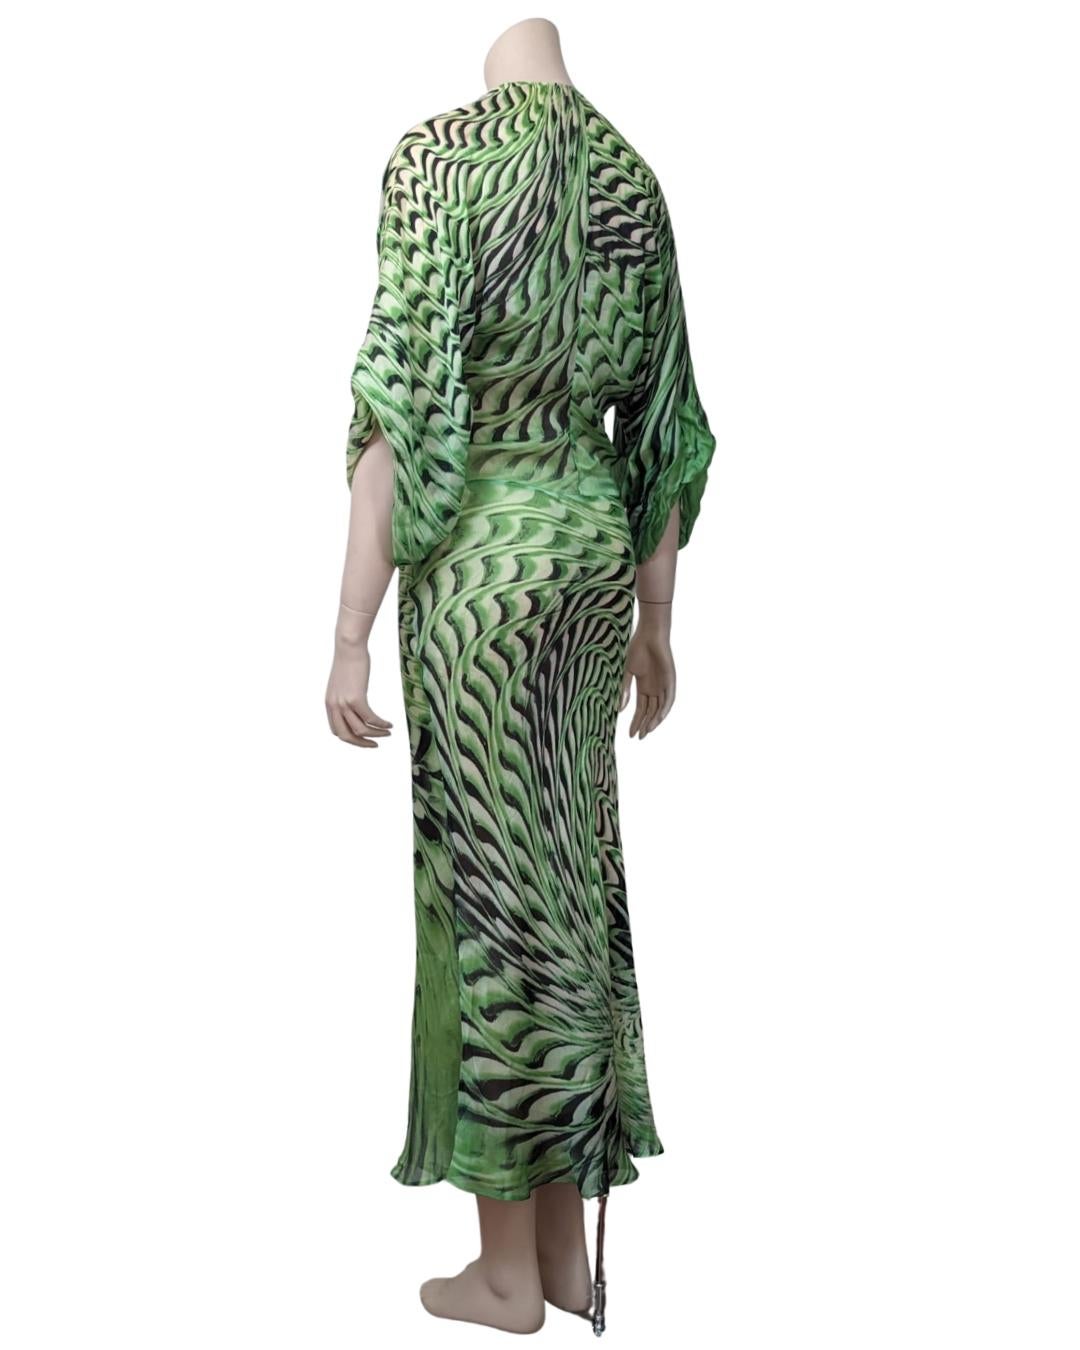 Roberto Cavalli S/S 2001 Runway Silk Dress In Good Condition For Sale In GOUVIEUX, FR